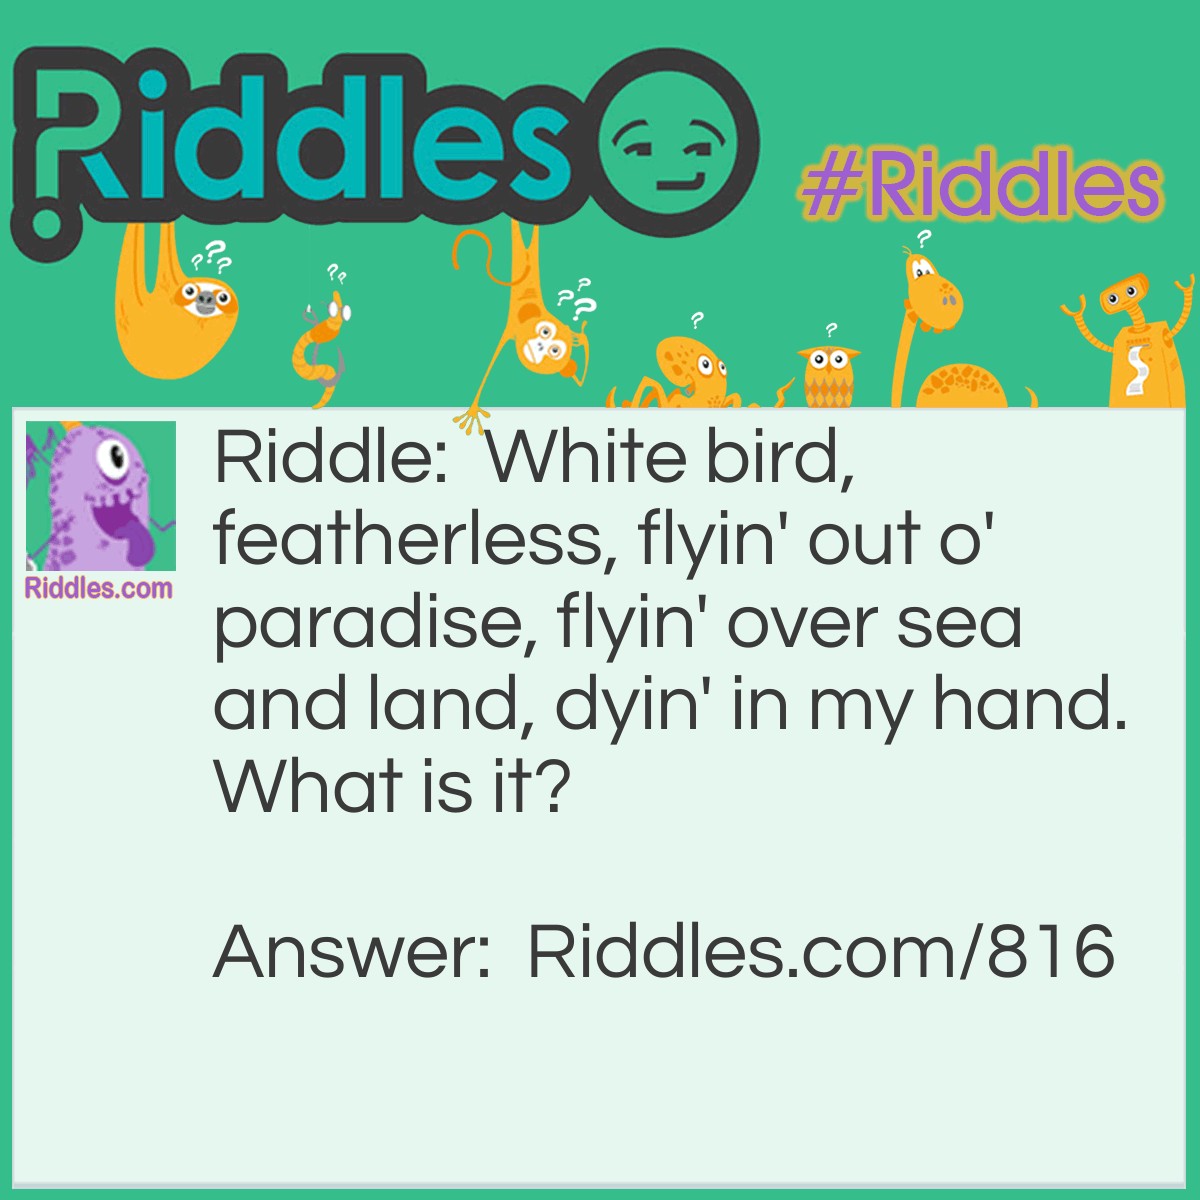 Riddle: White bird, featherless, flyin' out o' paradise, flyin' over sea and land, dyin' in my hand. What is it? Answer: A snowflake!